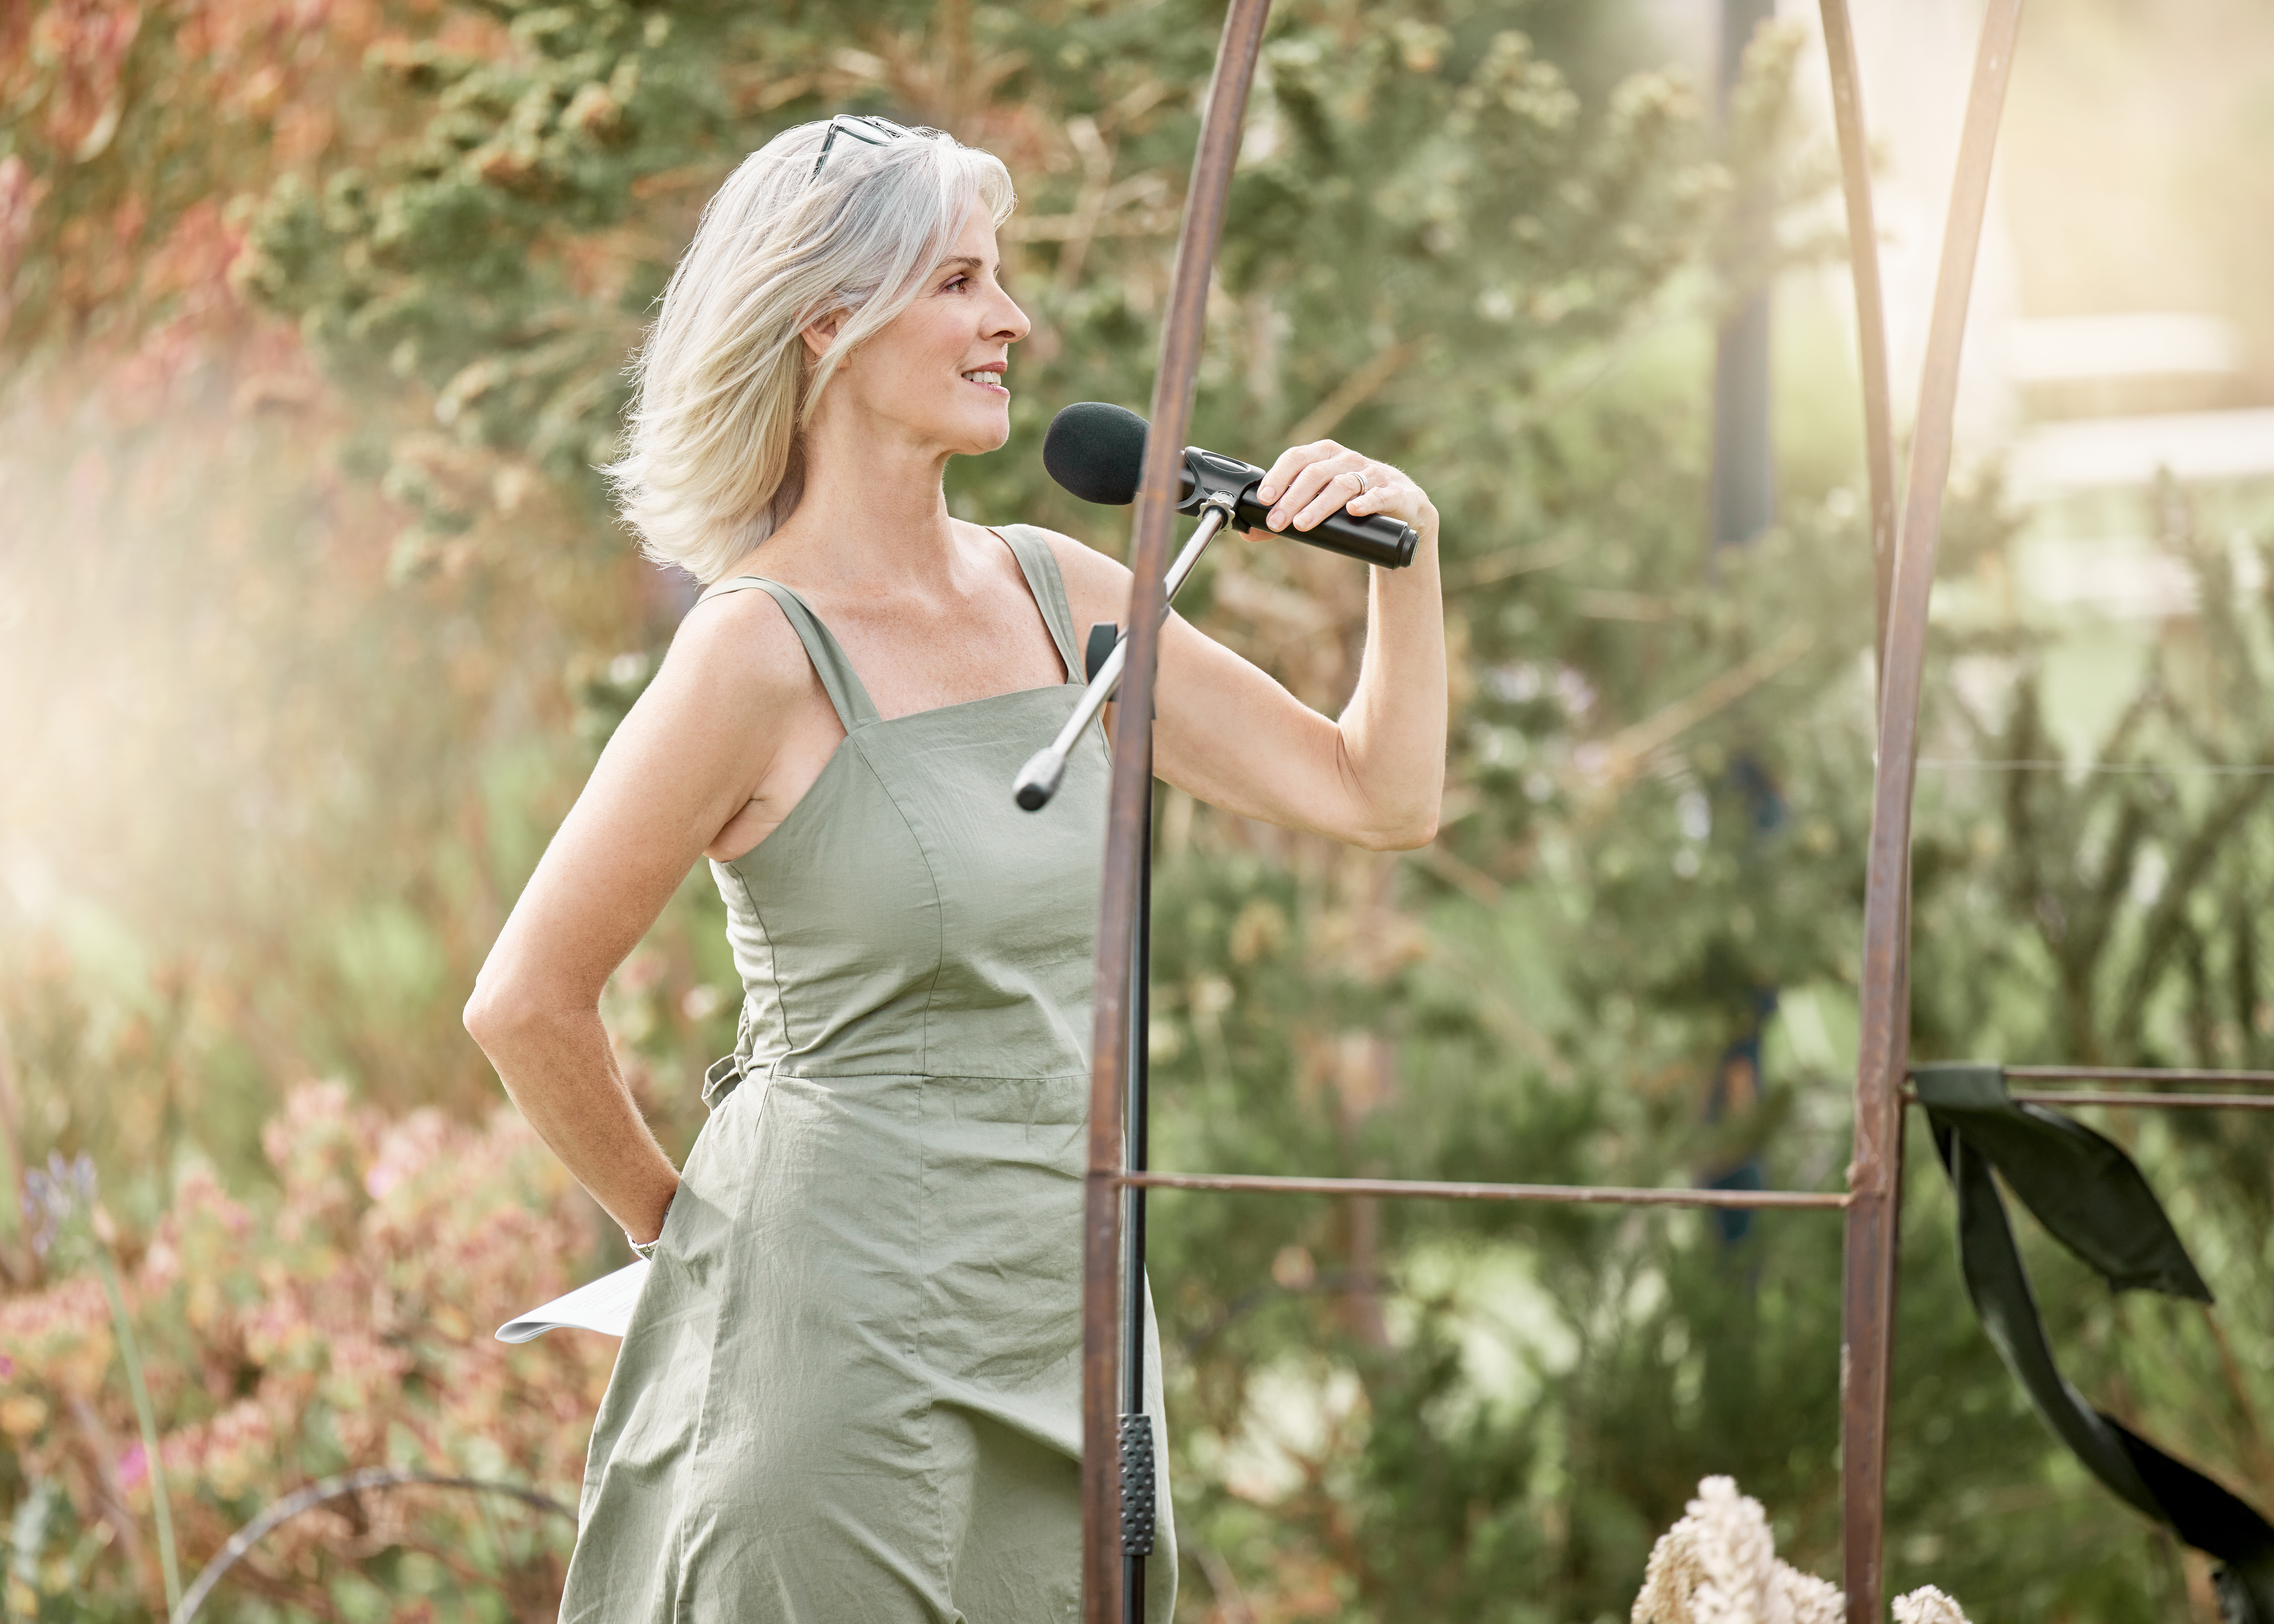 Woman, wedding and pastor speaker about to start a speech at an outdoor event. Elderly senior person that is family, friend or religious figure holding a microphone speaking and talking in nature | Source: Getty Images